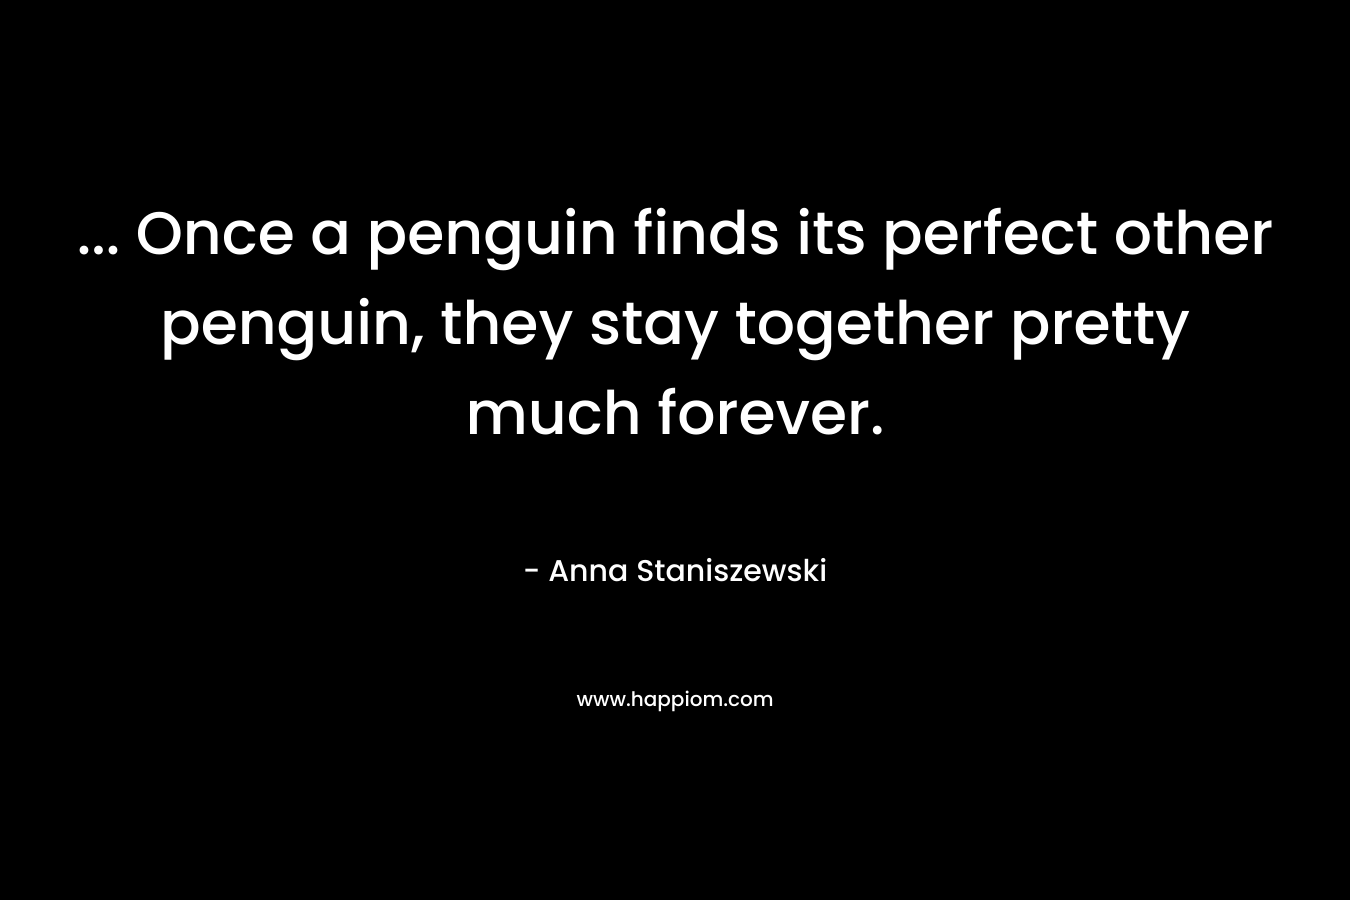 … Once a penguin finds its perfect other penguin, they stay together pretty much forever. – Anna Staniszewski